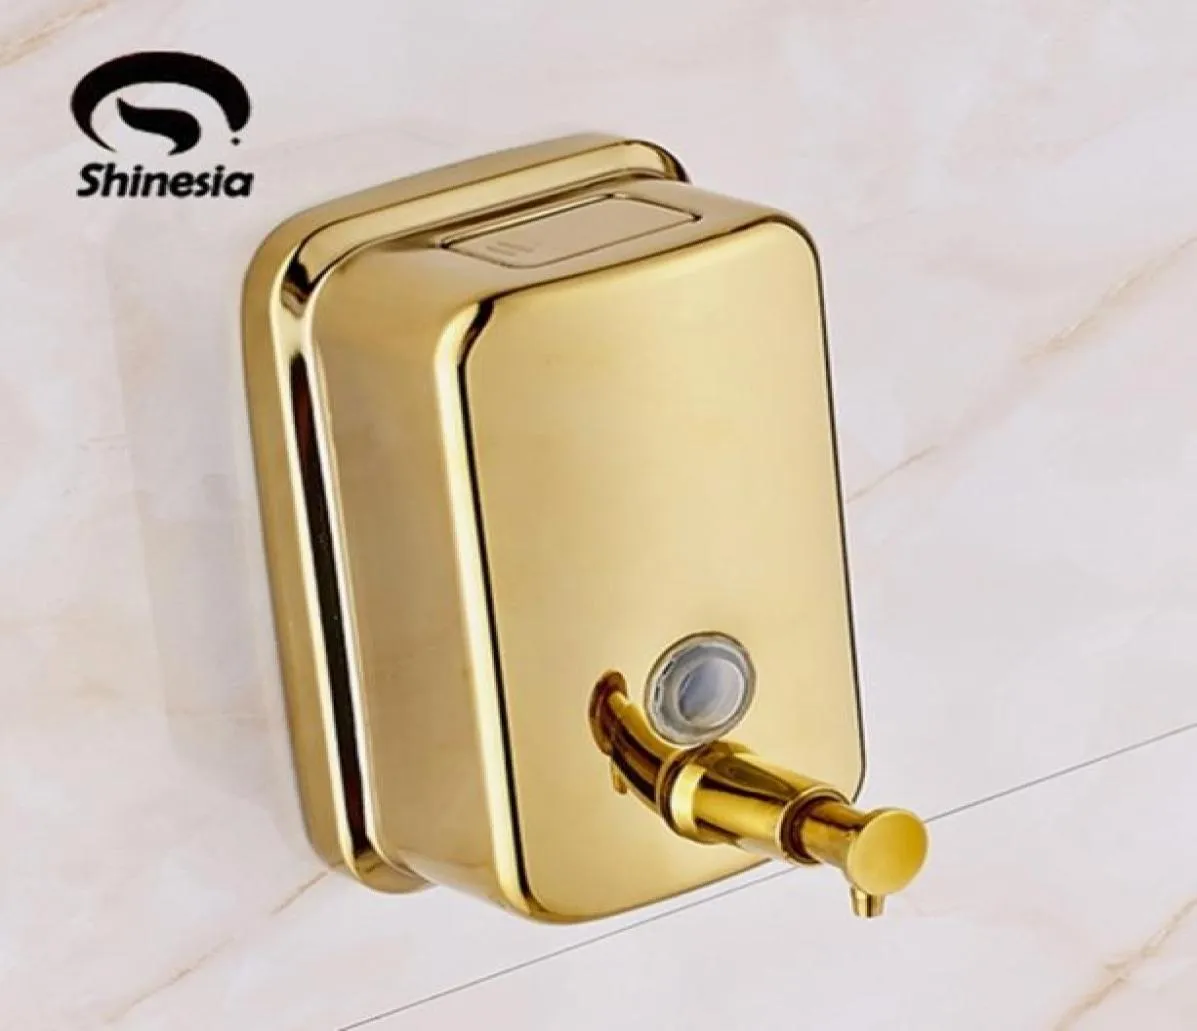 Whole and Retail Solid Brass Bathroom Liquid Soap Dispenser Gold Polished Wall Mount Y2004076152671